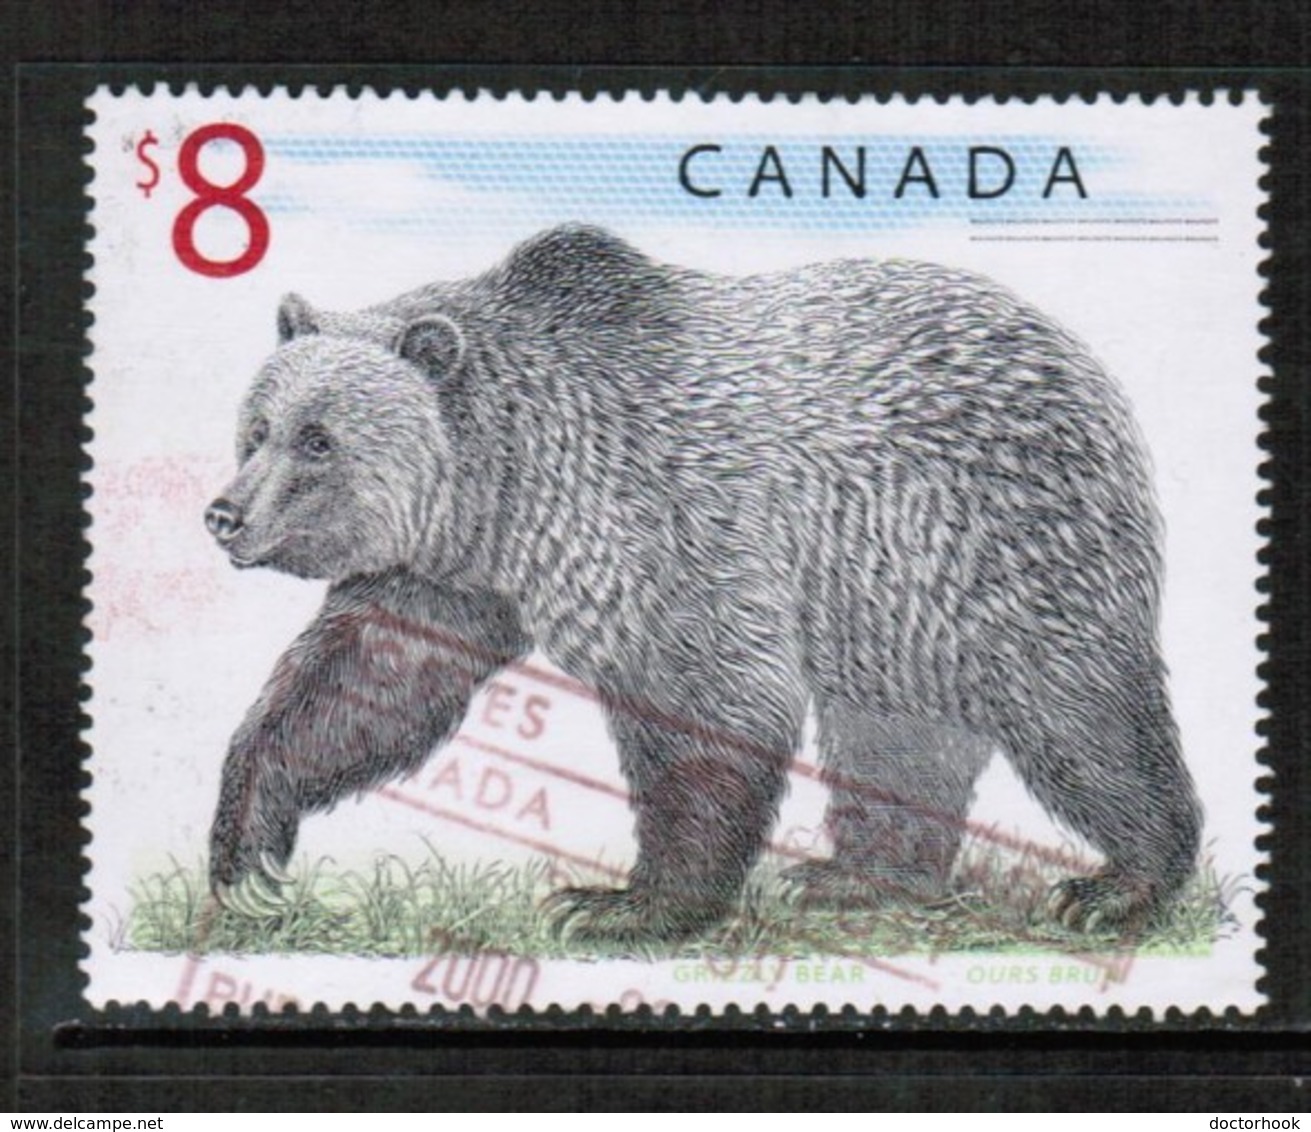 CANADA   Scott # 1694 VF USED (Stamp Scan # 435) - Used Stamps